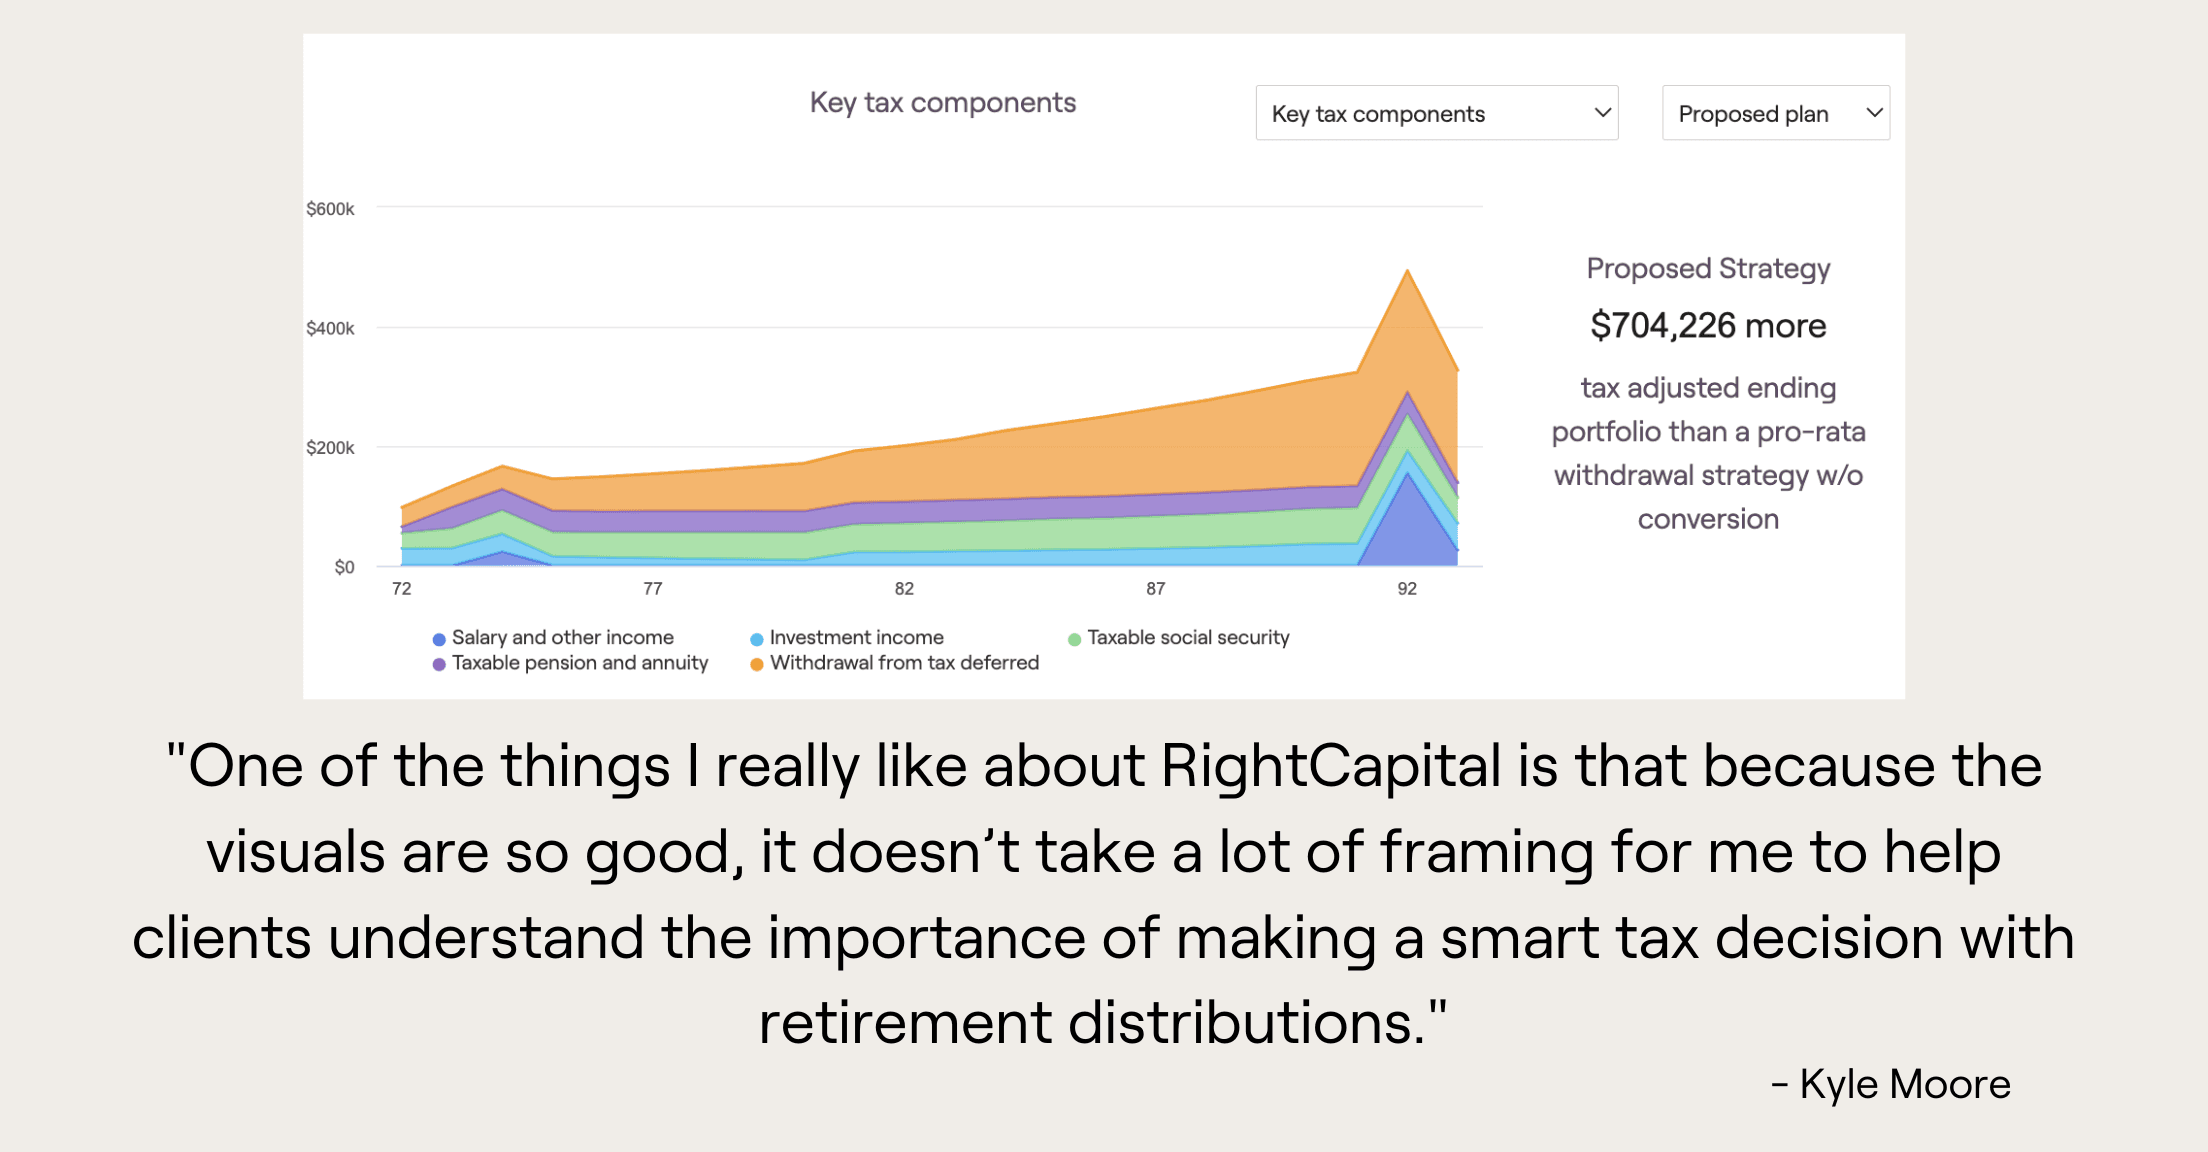 RightCapital tax visual and Kyle Moore quote, "One of the things I really like about RightCapital is that because the visuals are so good, it doesn’t take a lot of framing for me to help clients understand the importance of making a smart tax decision with retirement distributions."